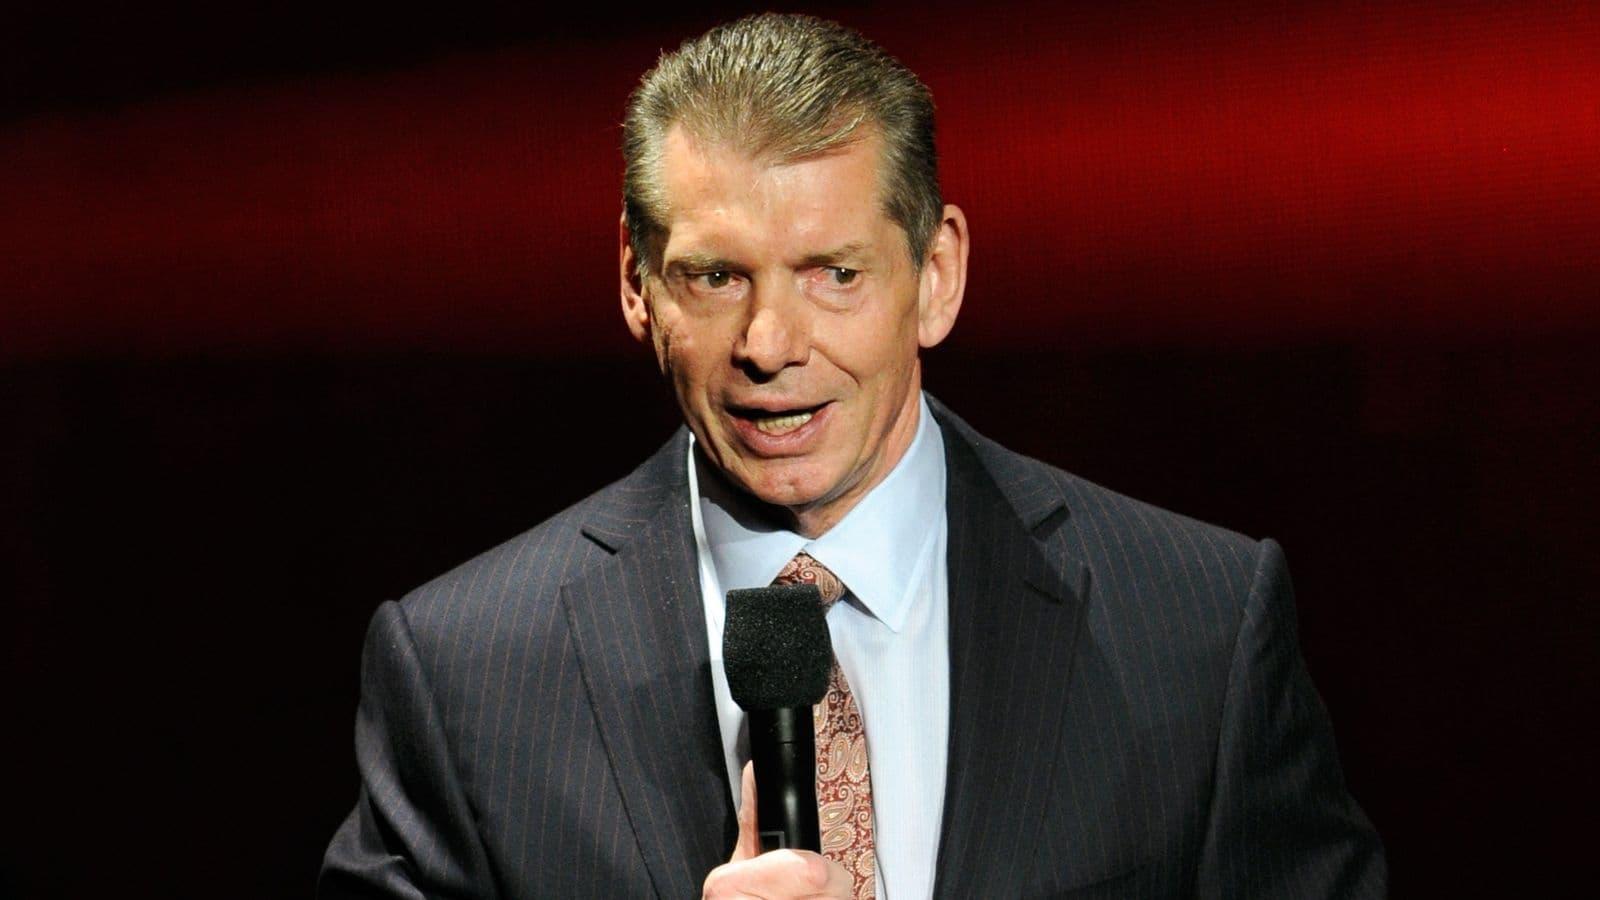 The Nine Lives of Vince McMahon backdrop